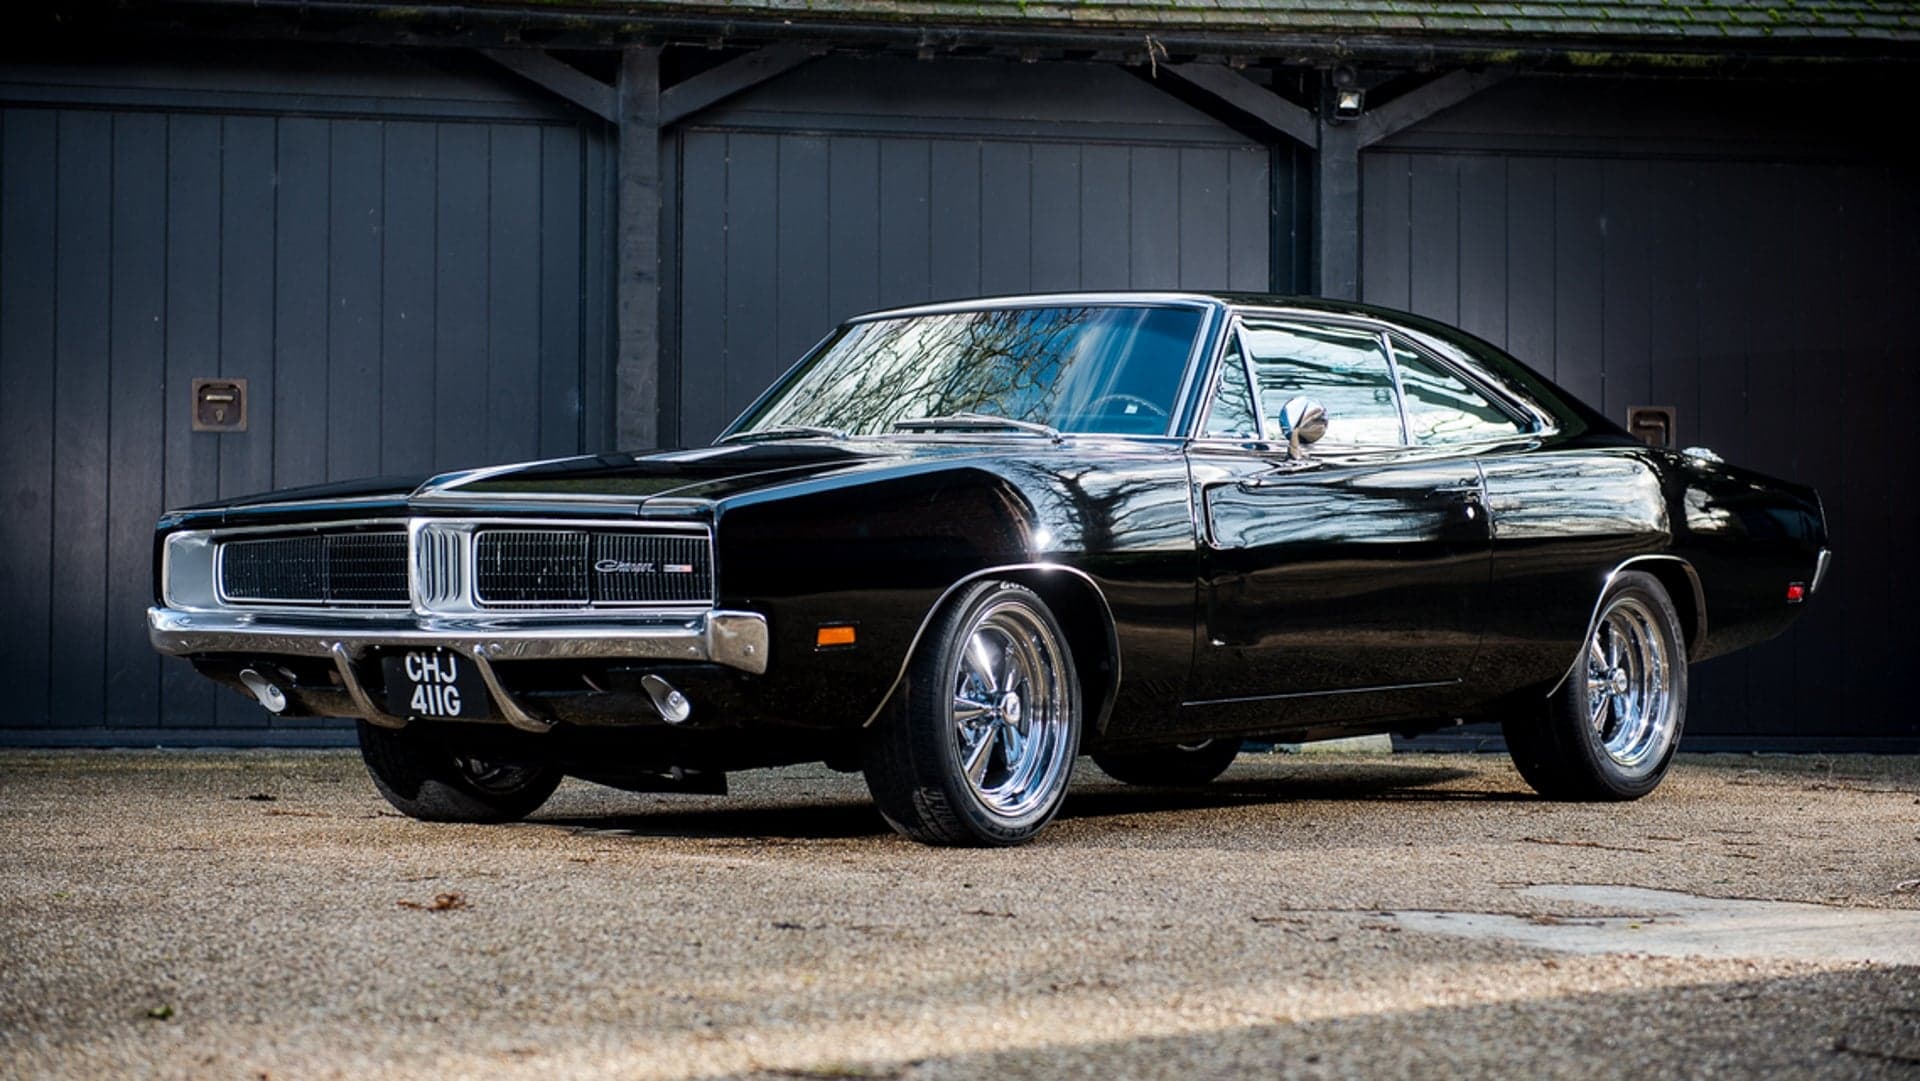 For Sale: 1969 Dodge Charger Bullitt Replica Once Owned by Bruce Willis